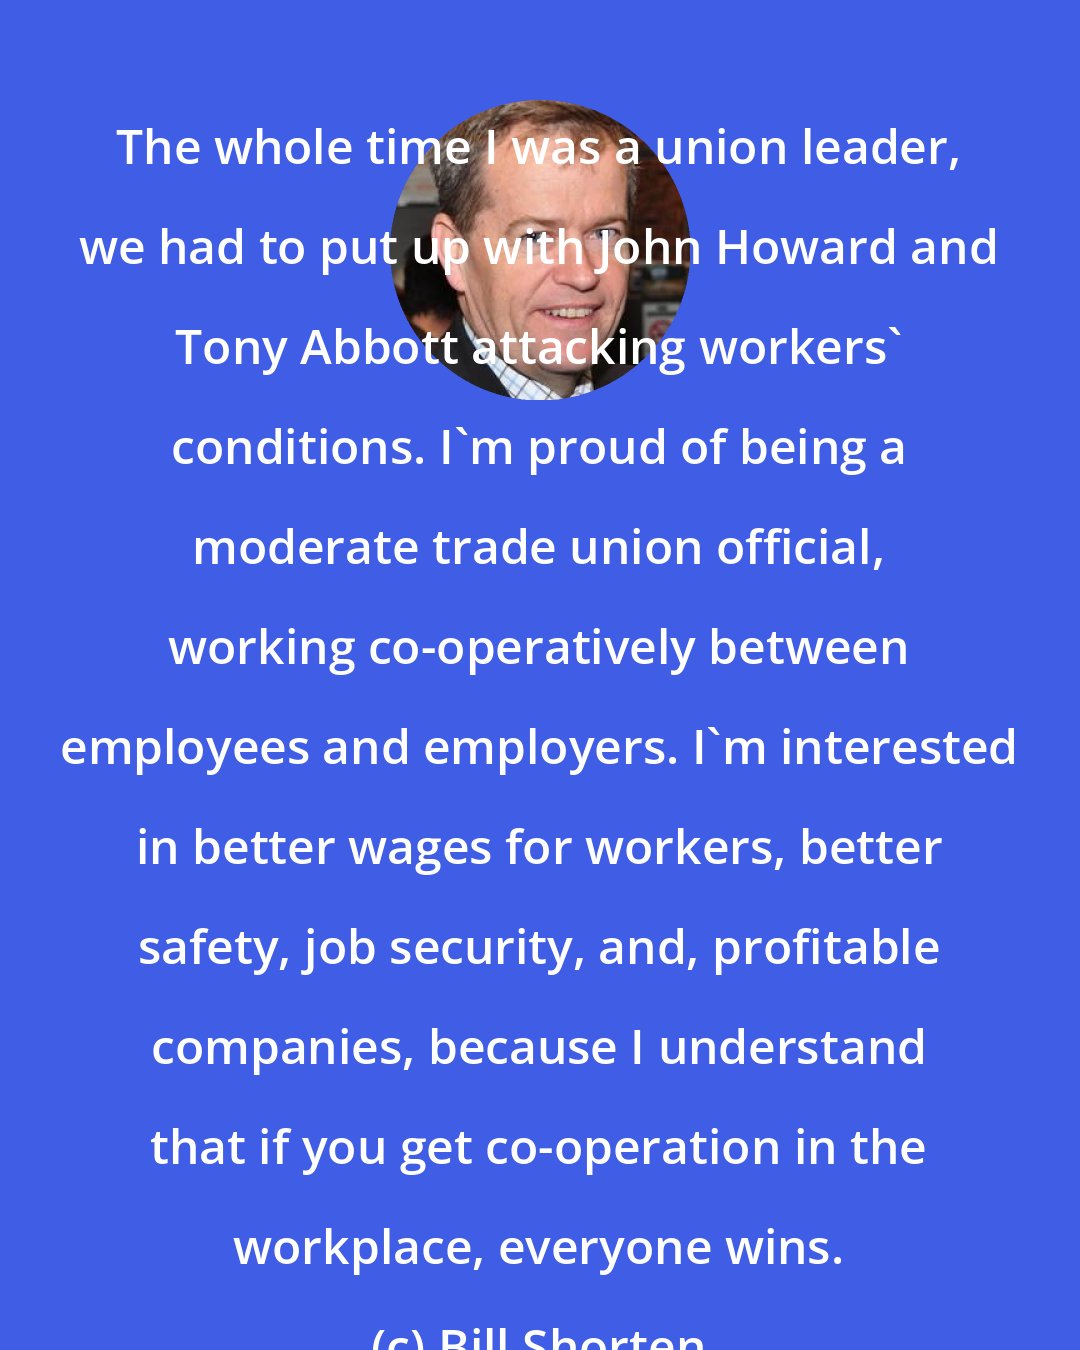 Bill Shorten: The whole time I was a union leader, we had to put up with John Howard and Tony Abbott attacking workers' conditions. I'm proud of being a moderate trade union official, working co-operatively between employees and employers. I'm interested in better wages for workers, better safety, job security, and, profitable companies, because I understand that if you get co-operation in the workplace, everyone wins.